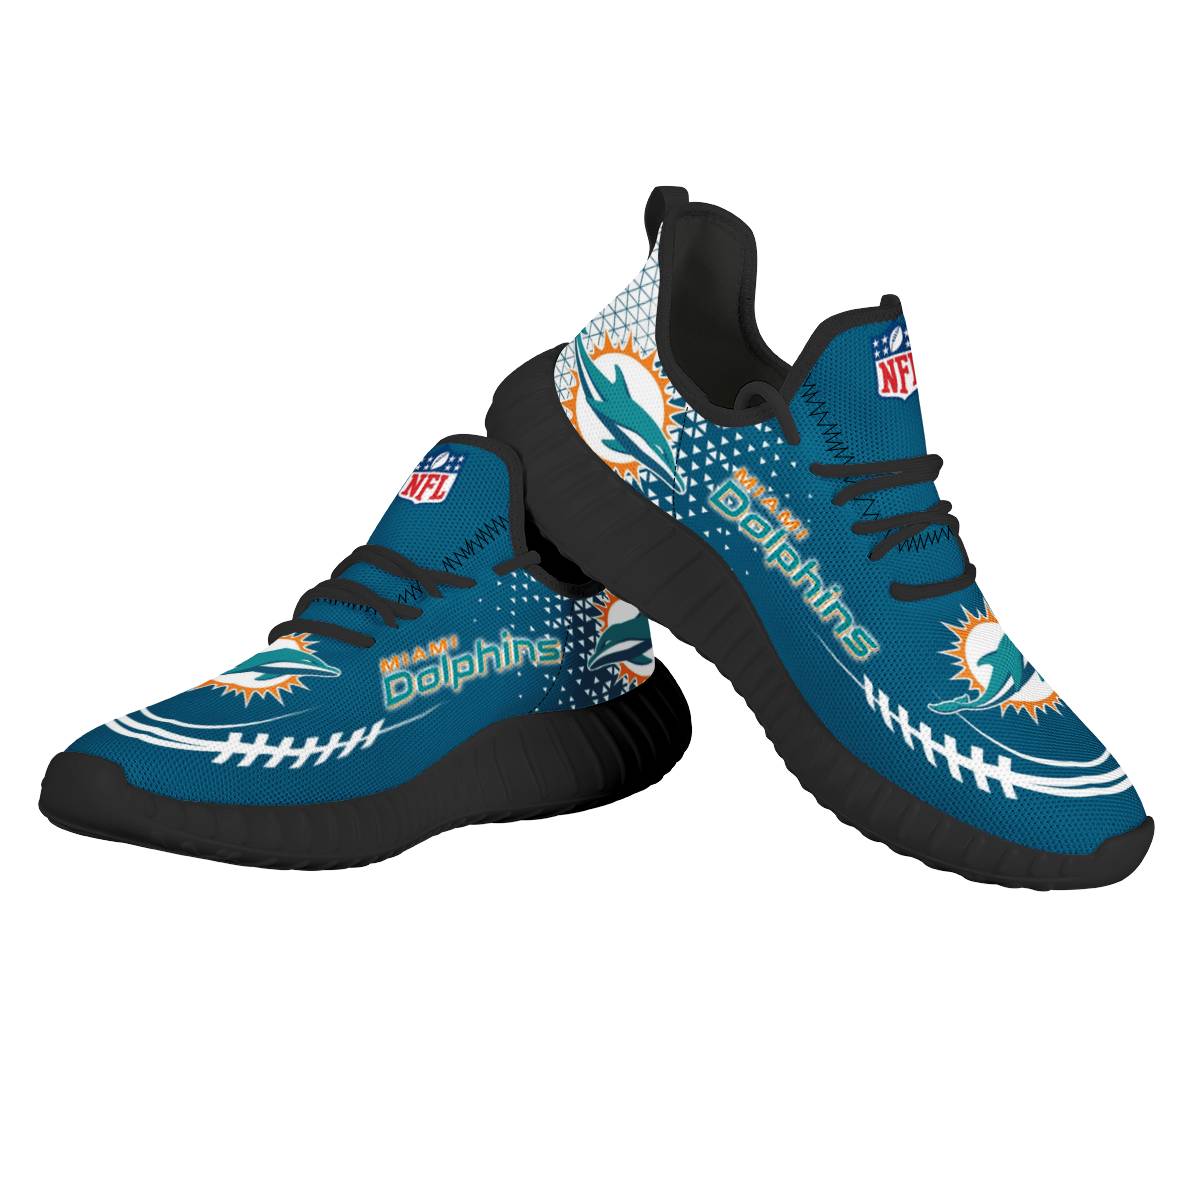 Women's Miami Dolphins Mesh Knit Sneakers/Shoes 001